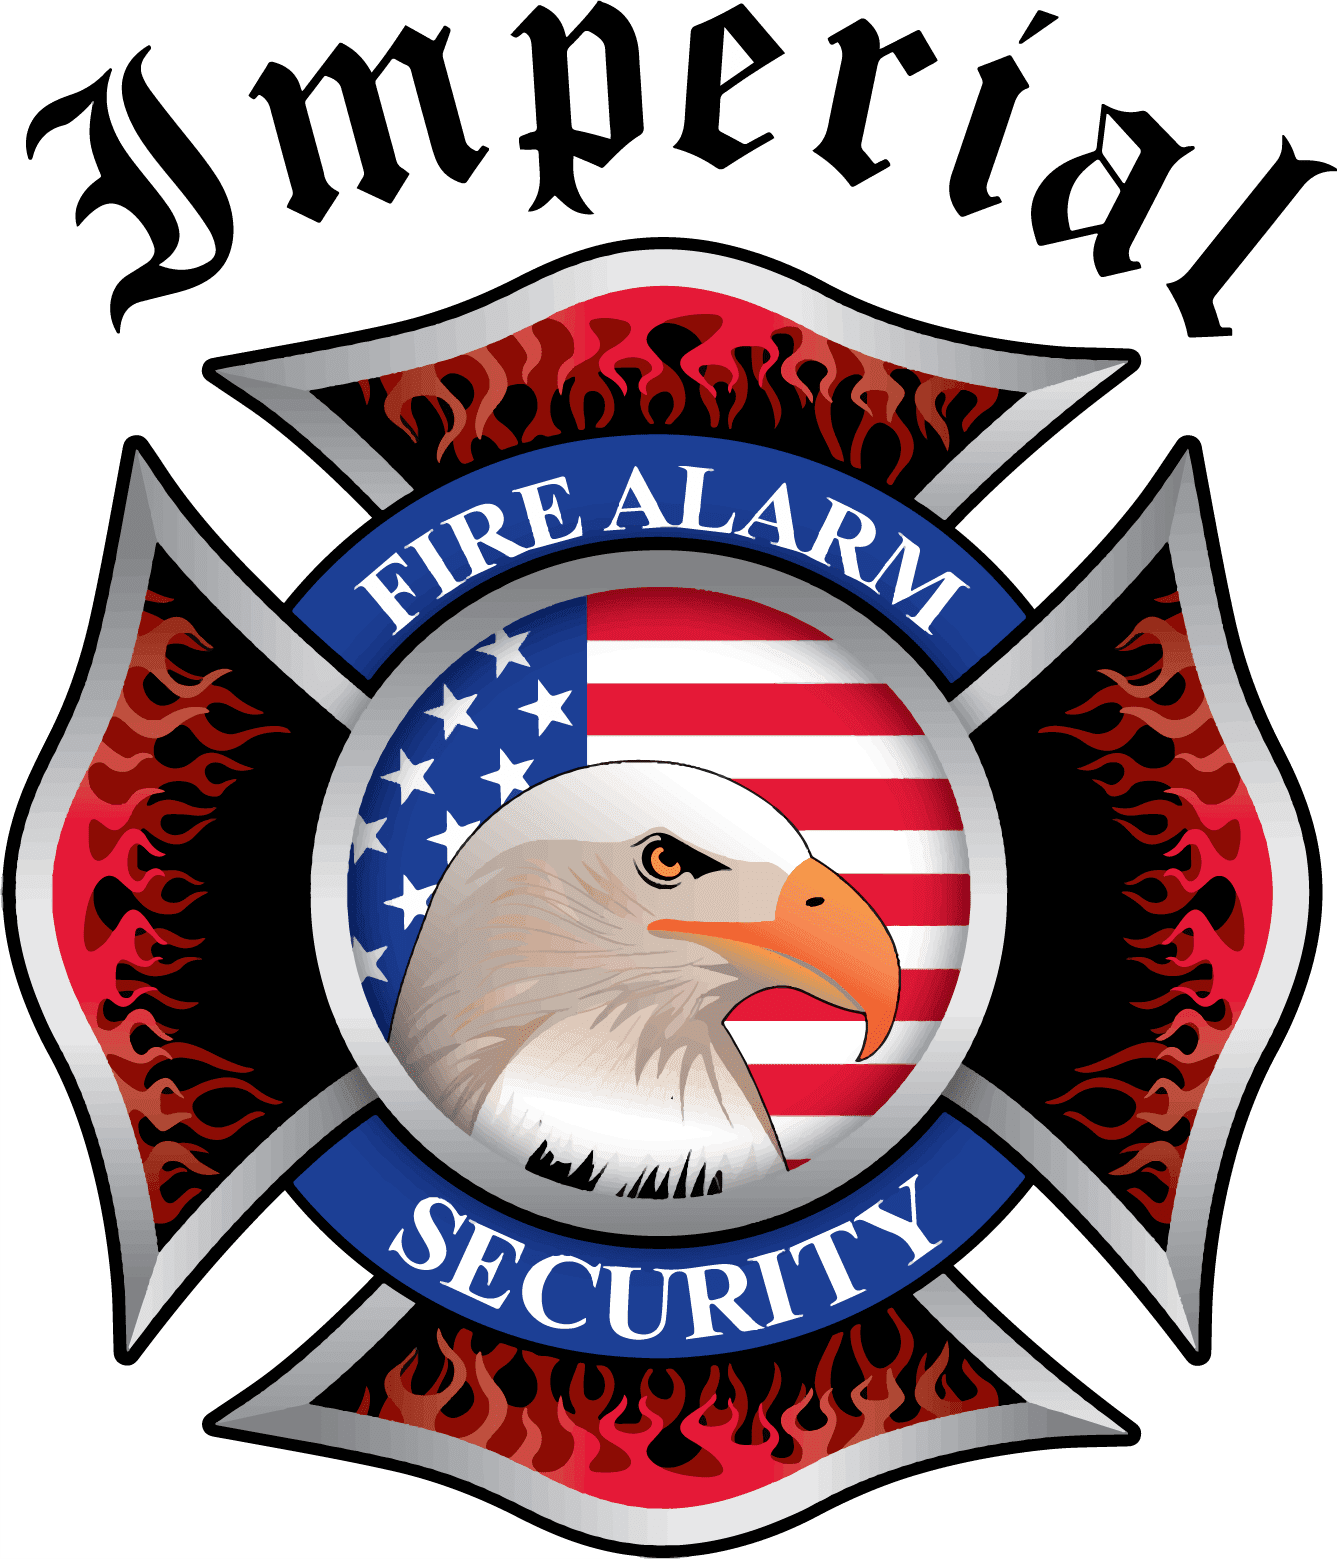 Imperial Fire Alarm & Security logo